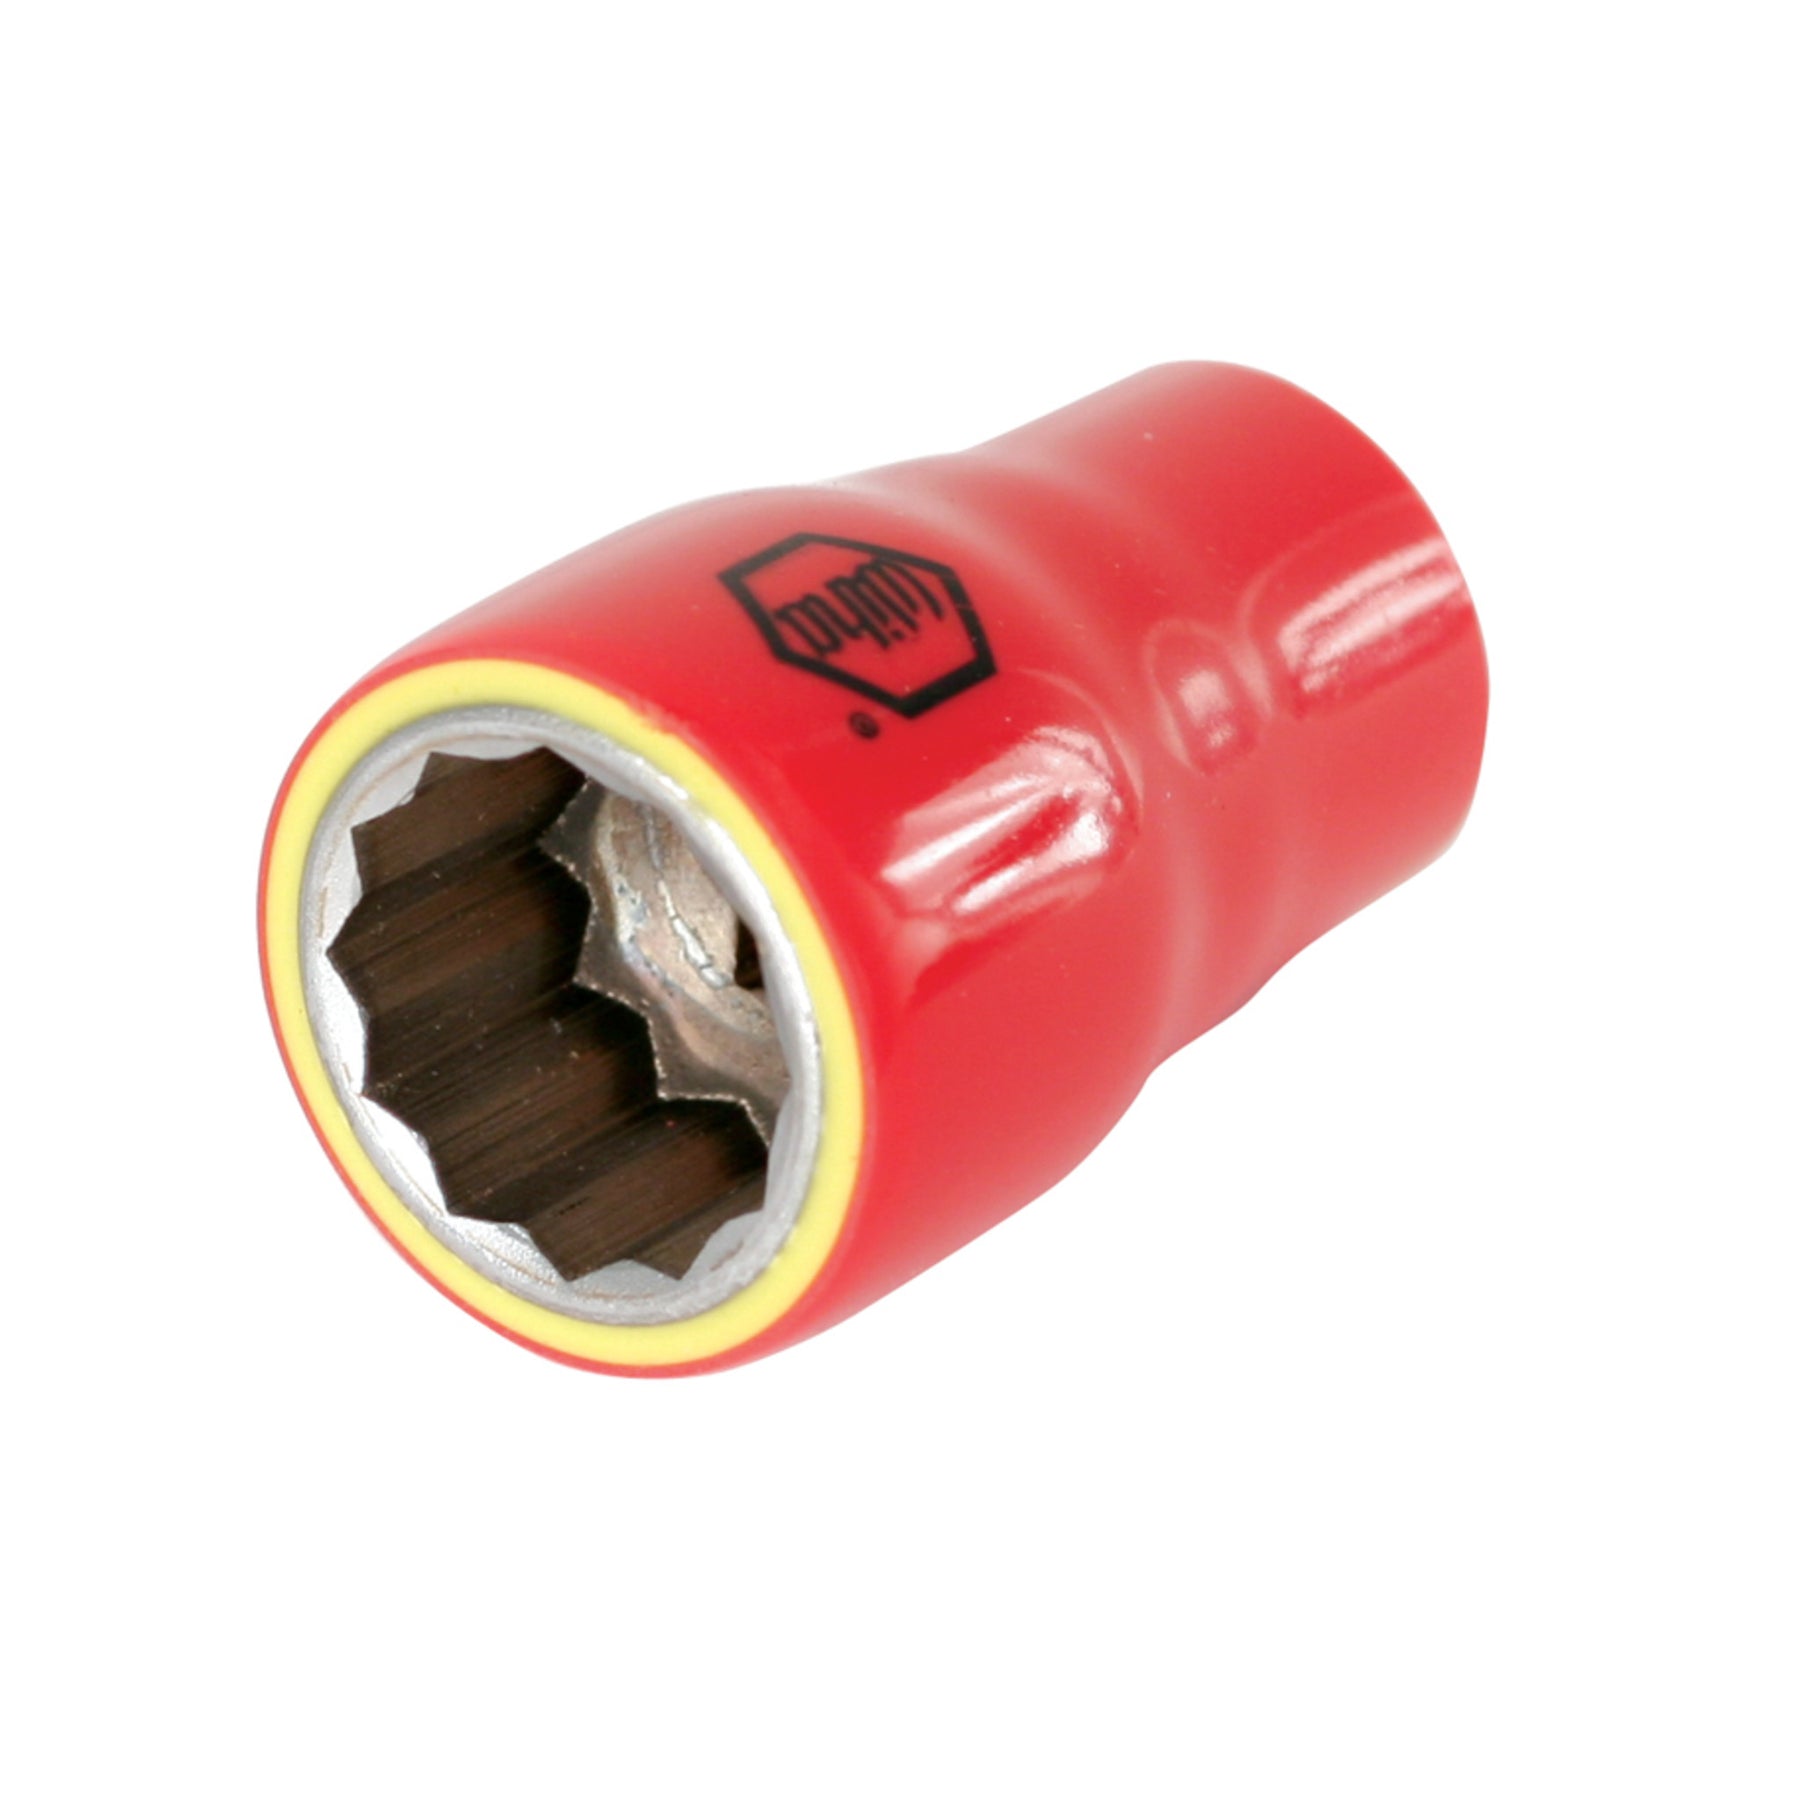 Insulated Socket 1/2" Drive 14mm